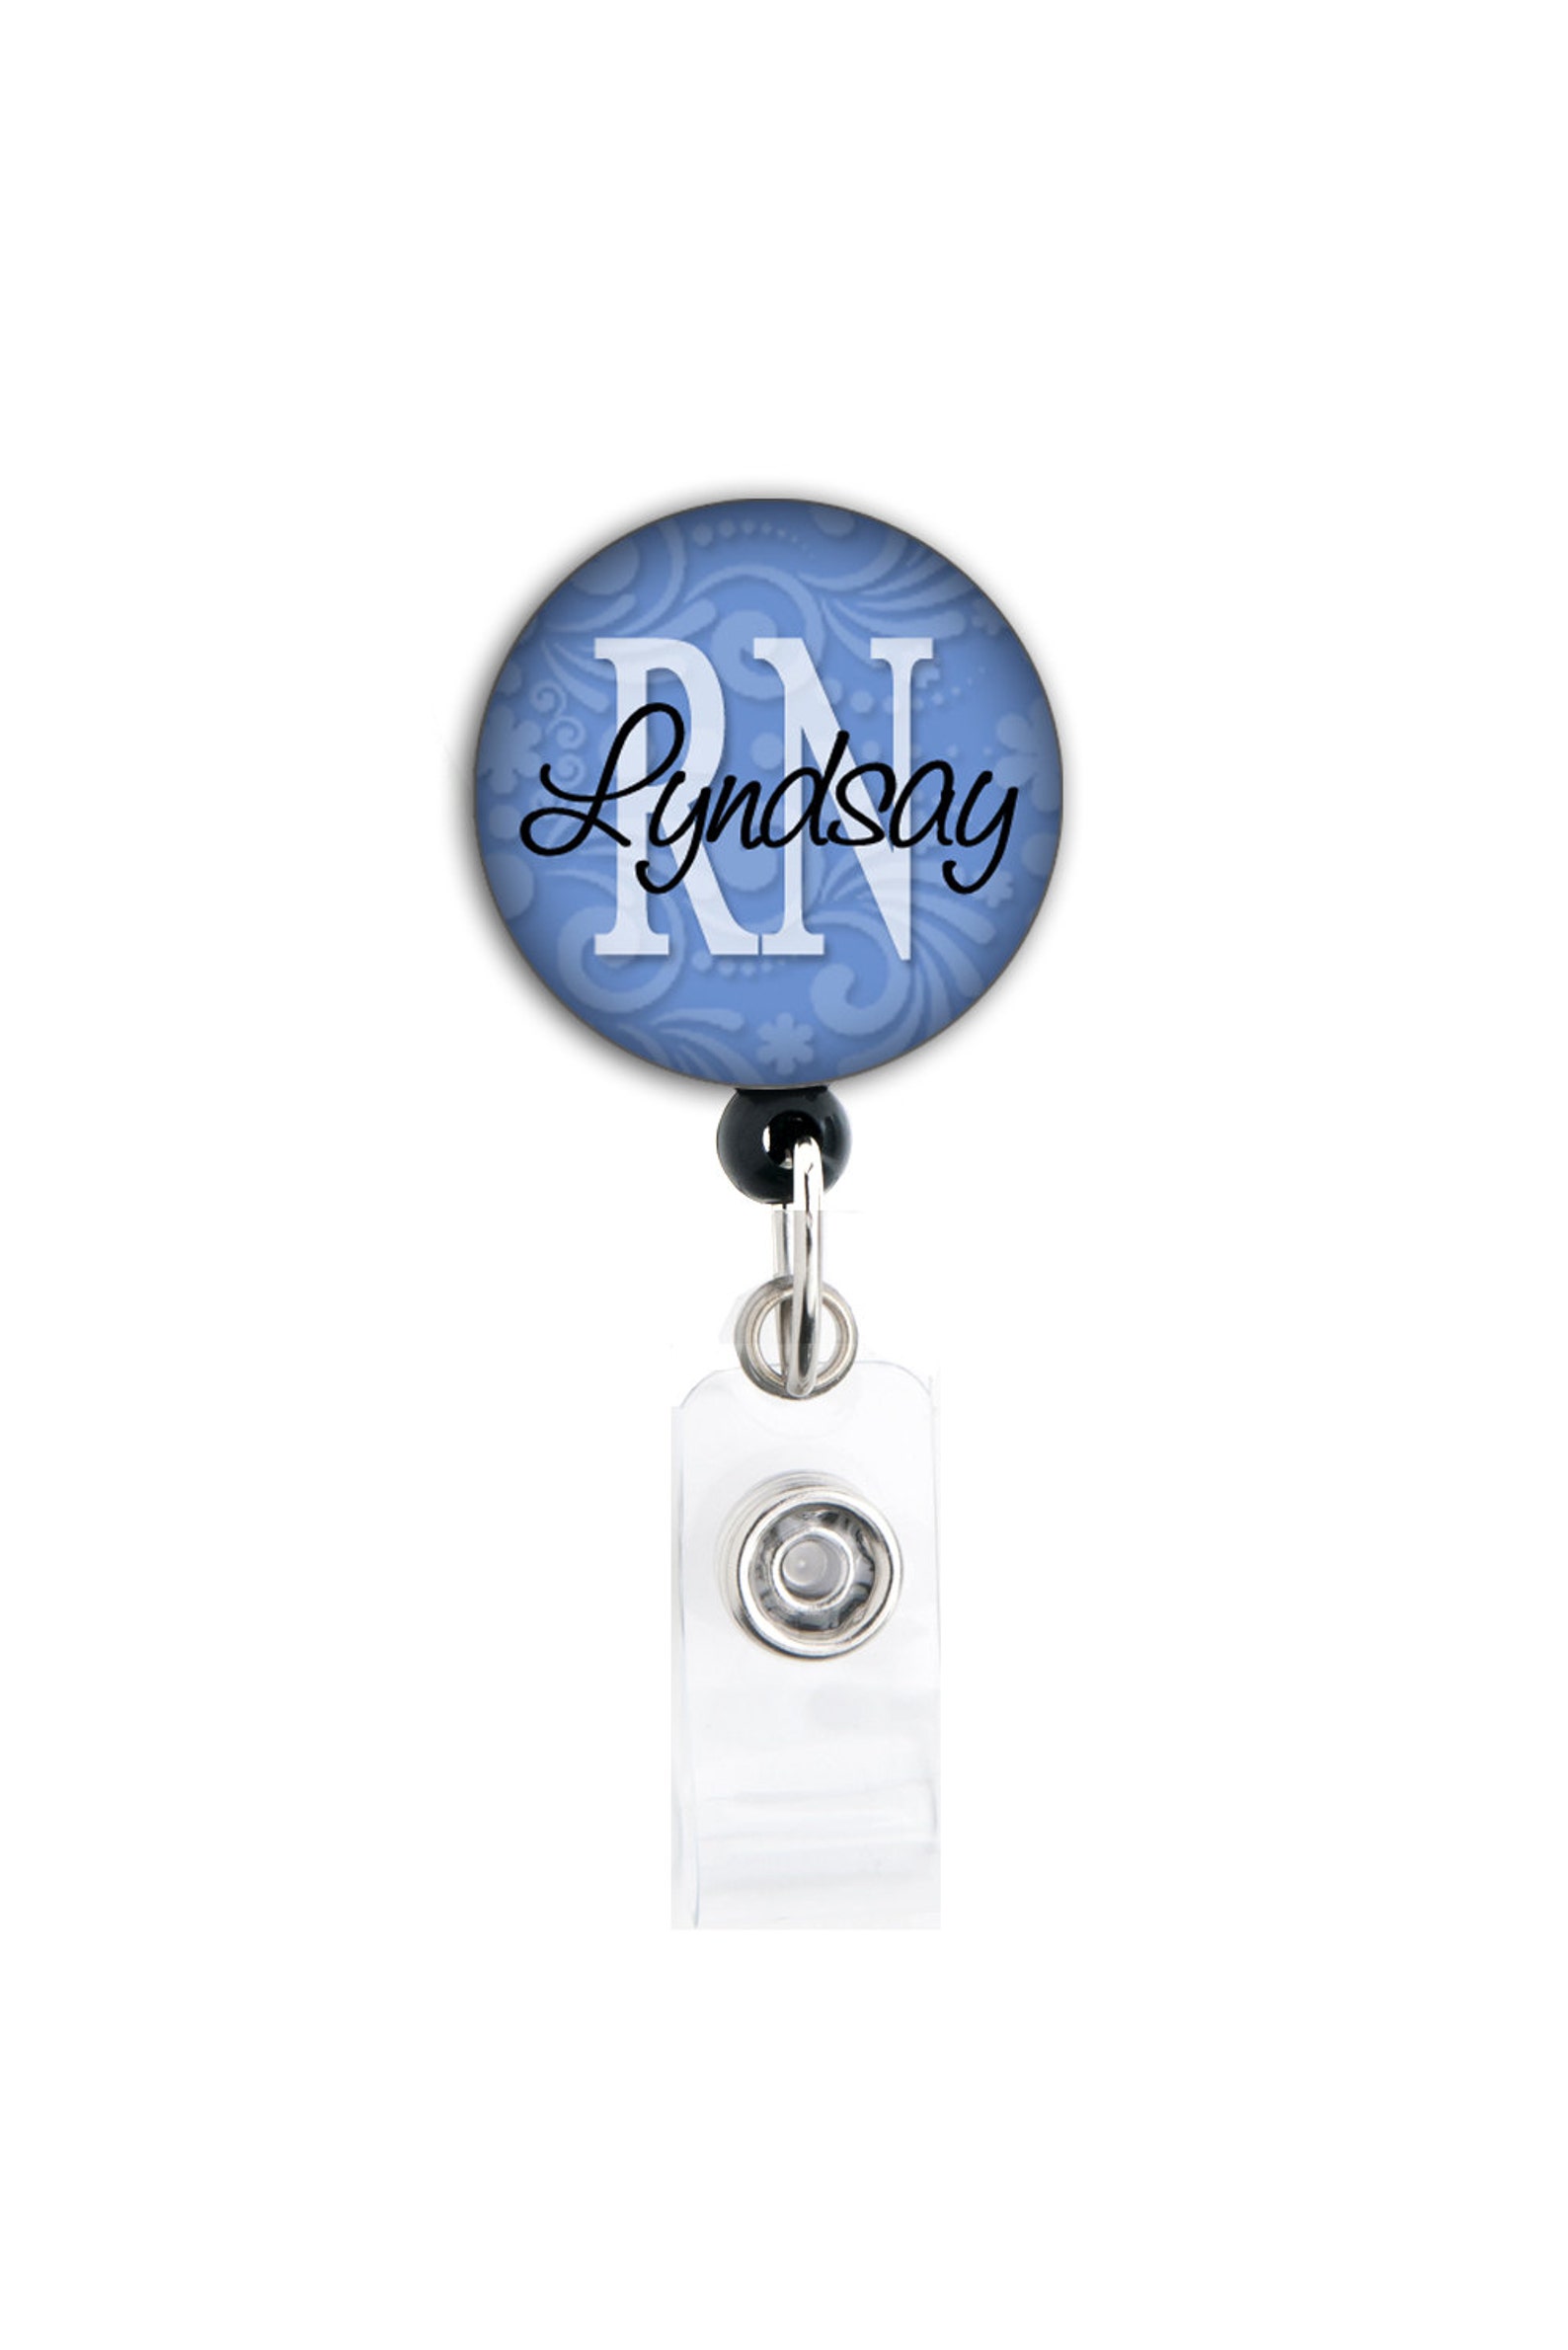 Retractable ID Badge Holder Personalized Name and Title - Etsy